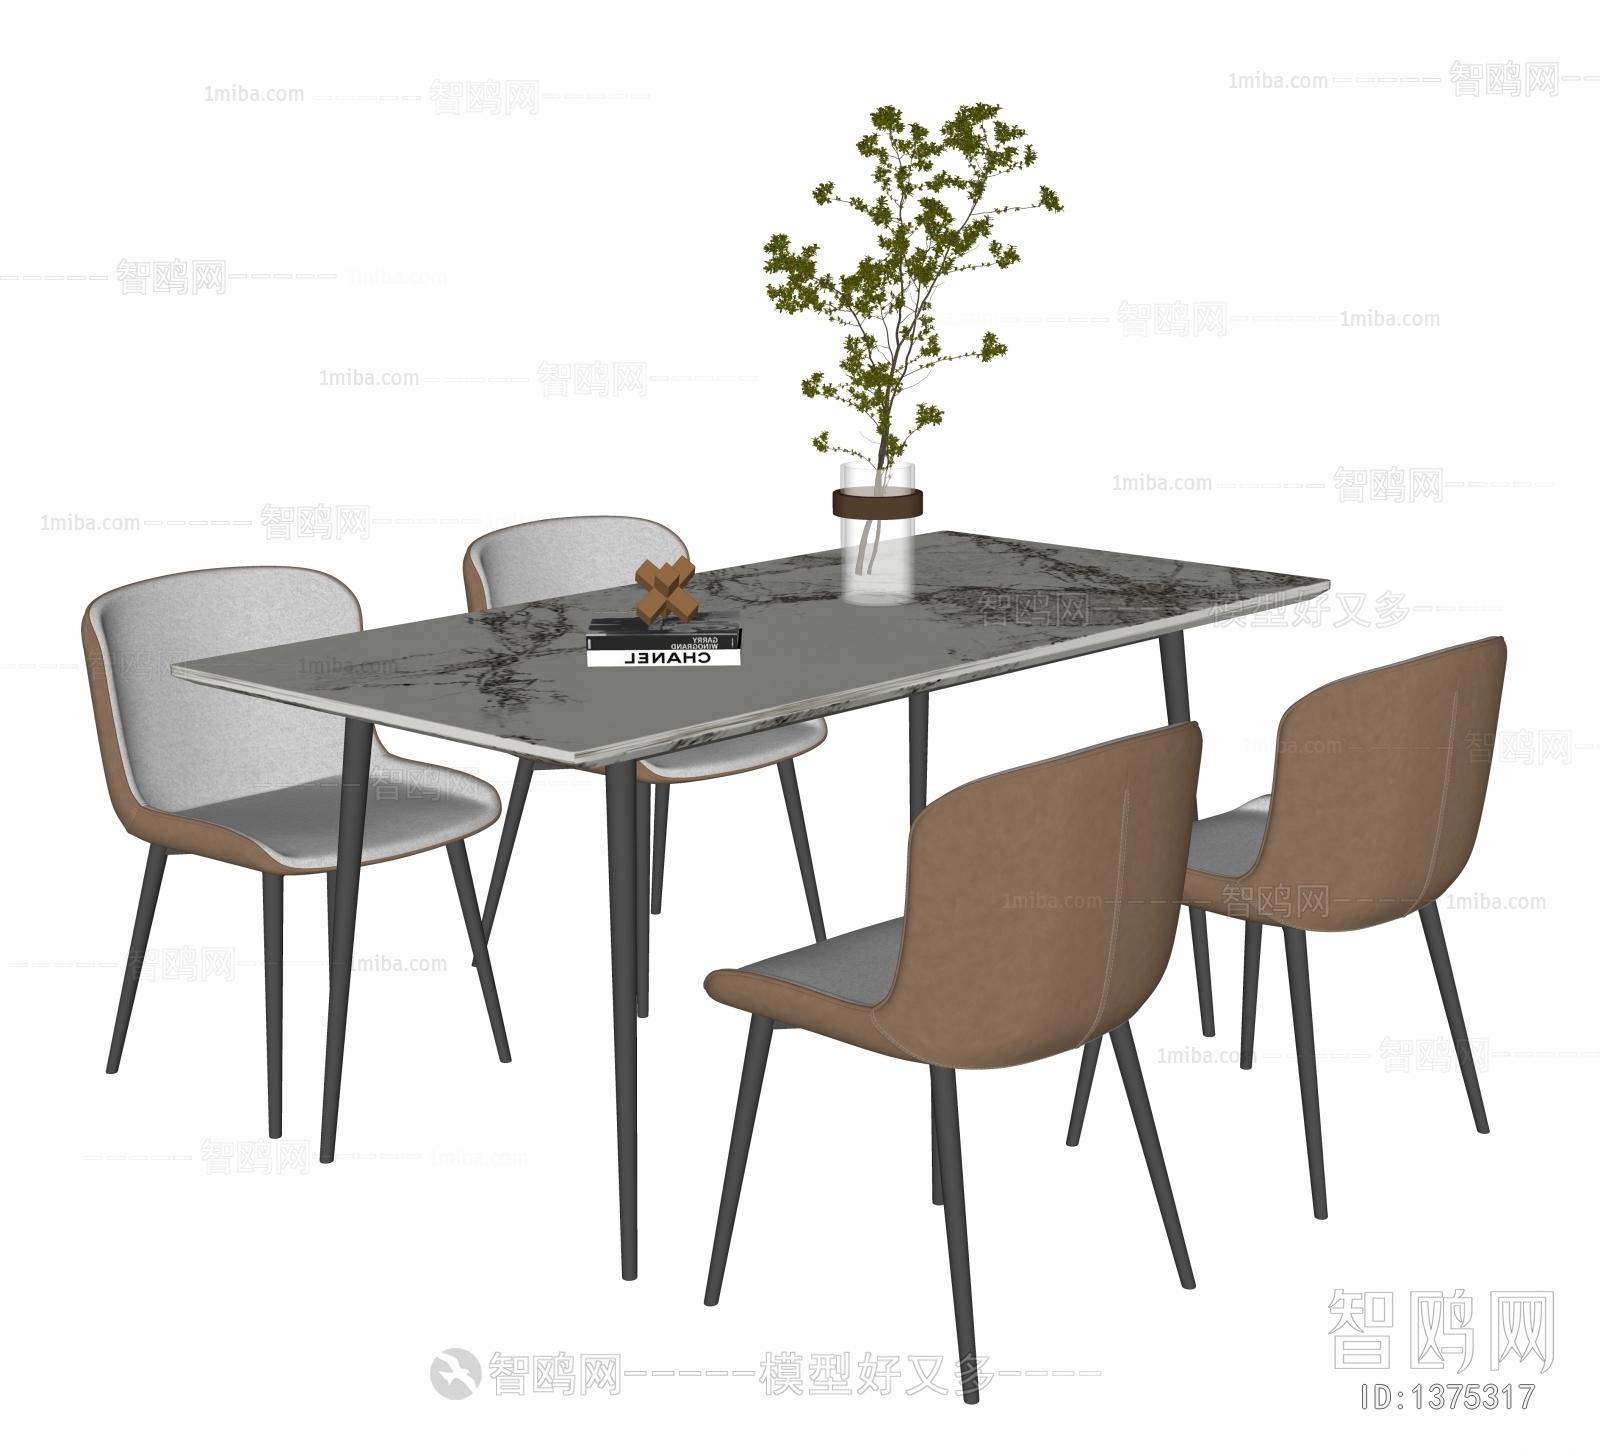 Modern Dining Table And Chairs Sketchup Model Download Model Id